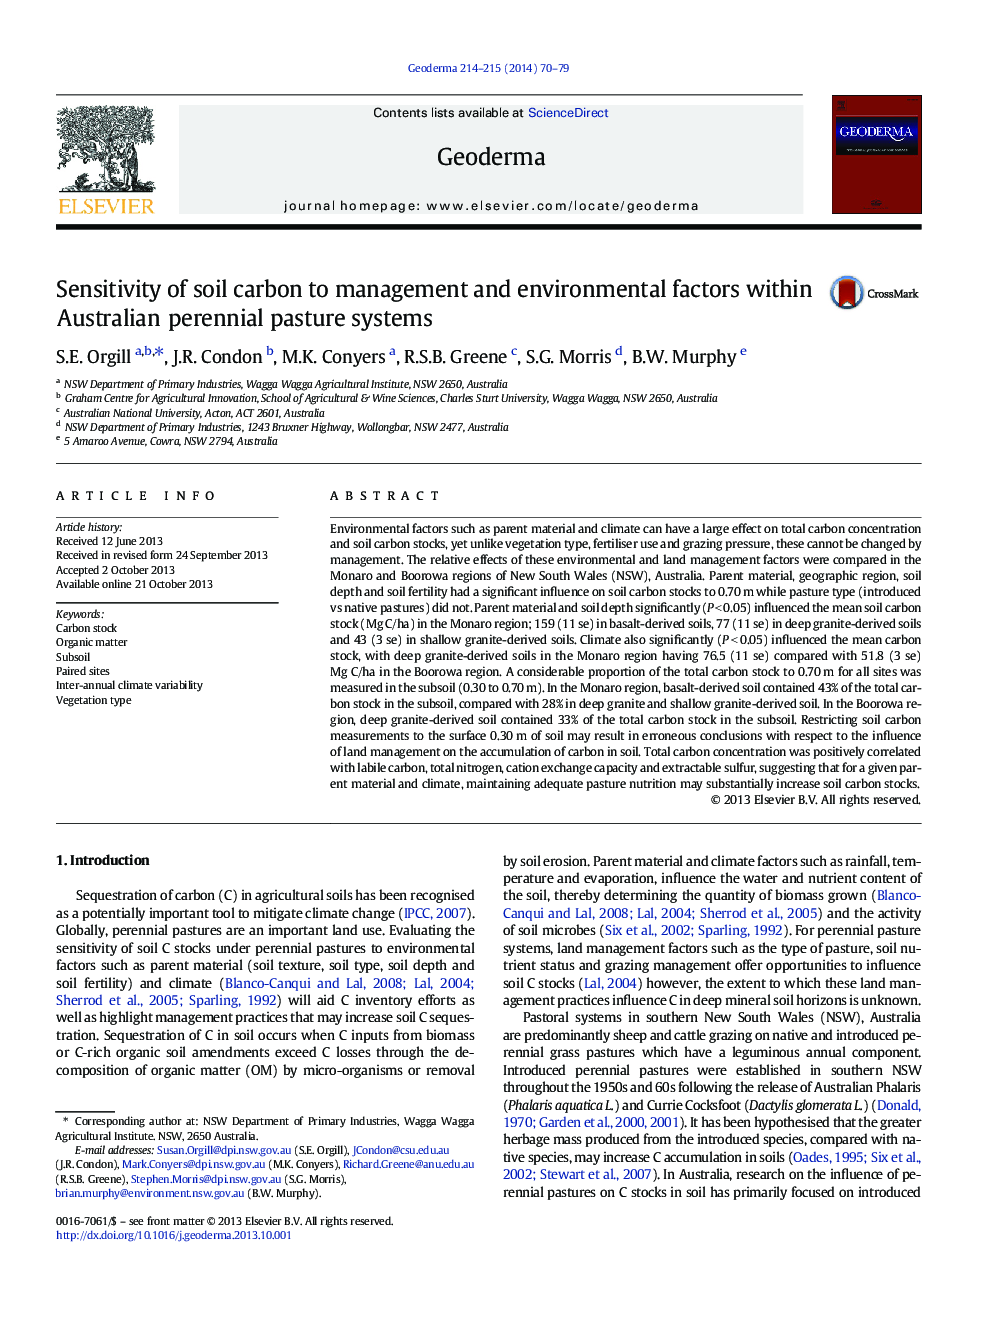 Sensitivity of soil carbon to management and environmental factors within Australian perennial pasture systems